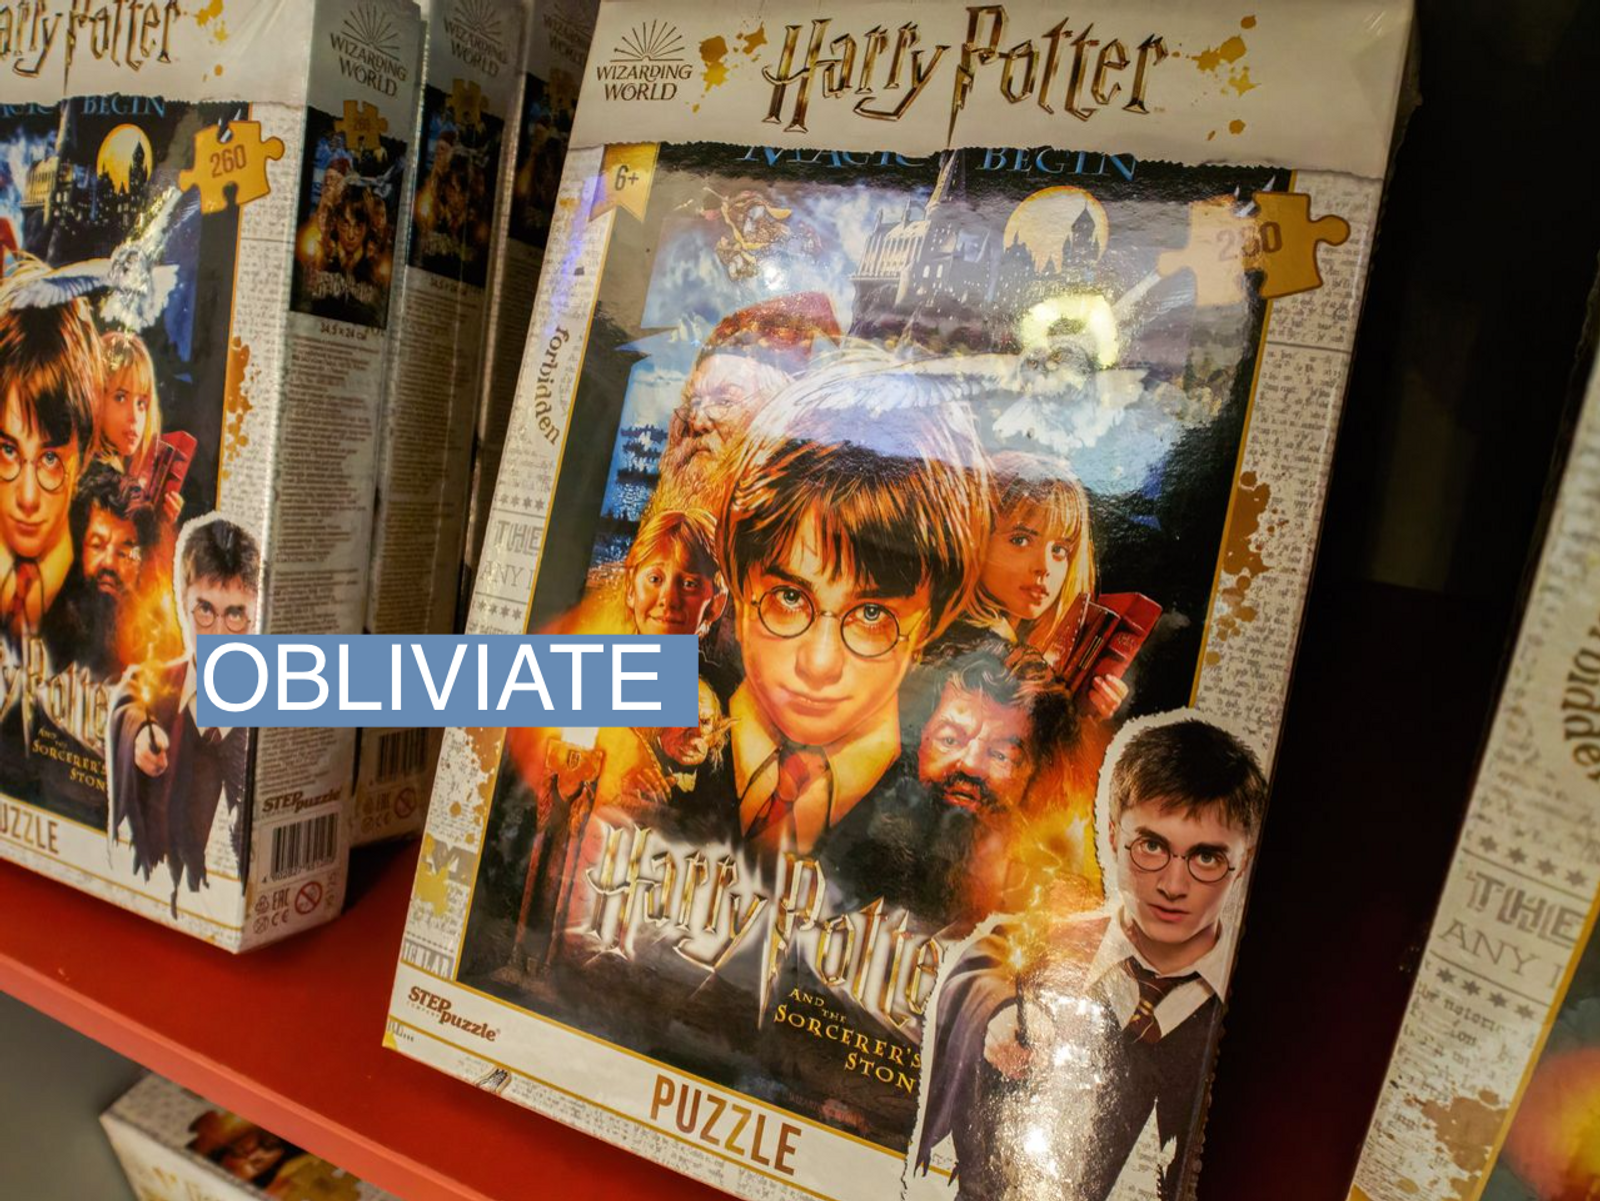  Harry Potter pop-up shop opens Central Children's Store in Lubyanka, Russia in 2021